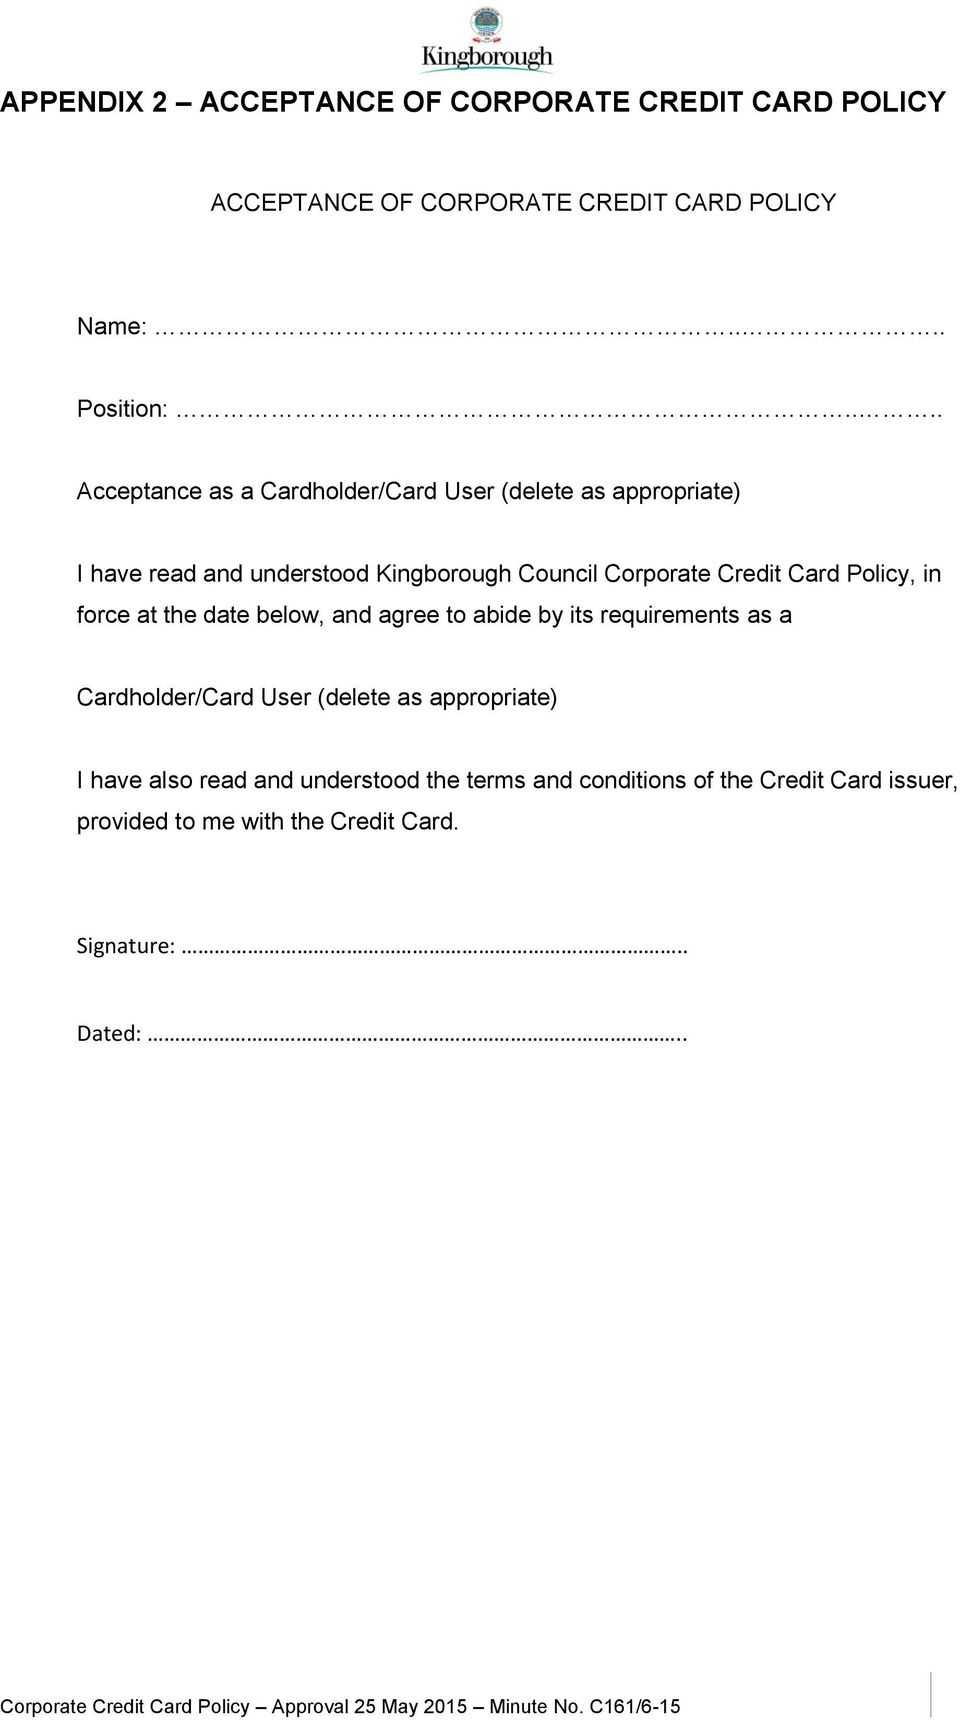 28+ [ Corporate Credit Card Policy Template ] | Corporate Regarding Company Credit Card Policy Template